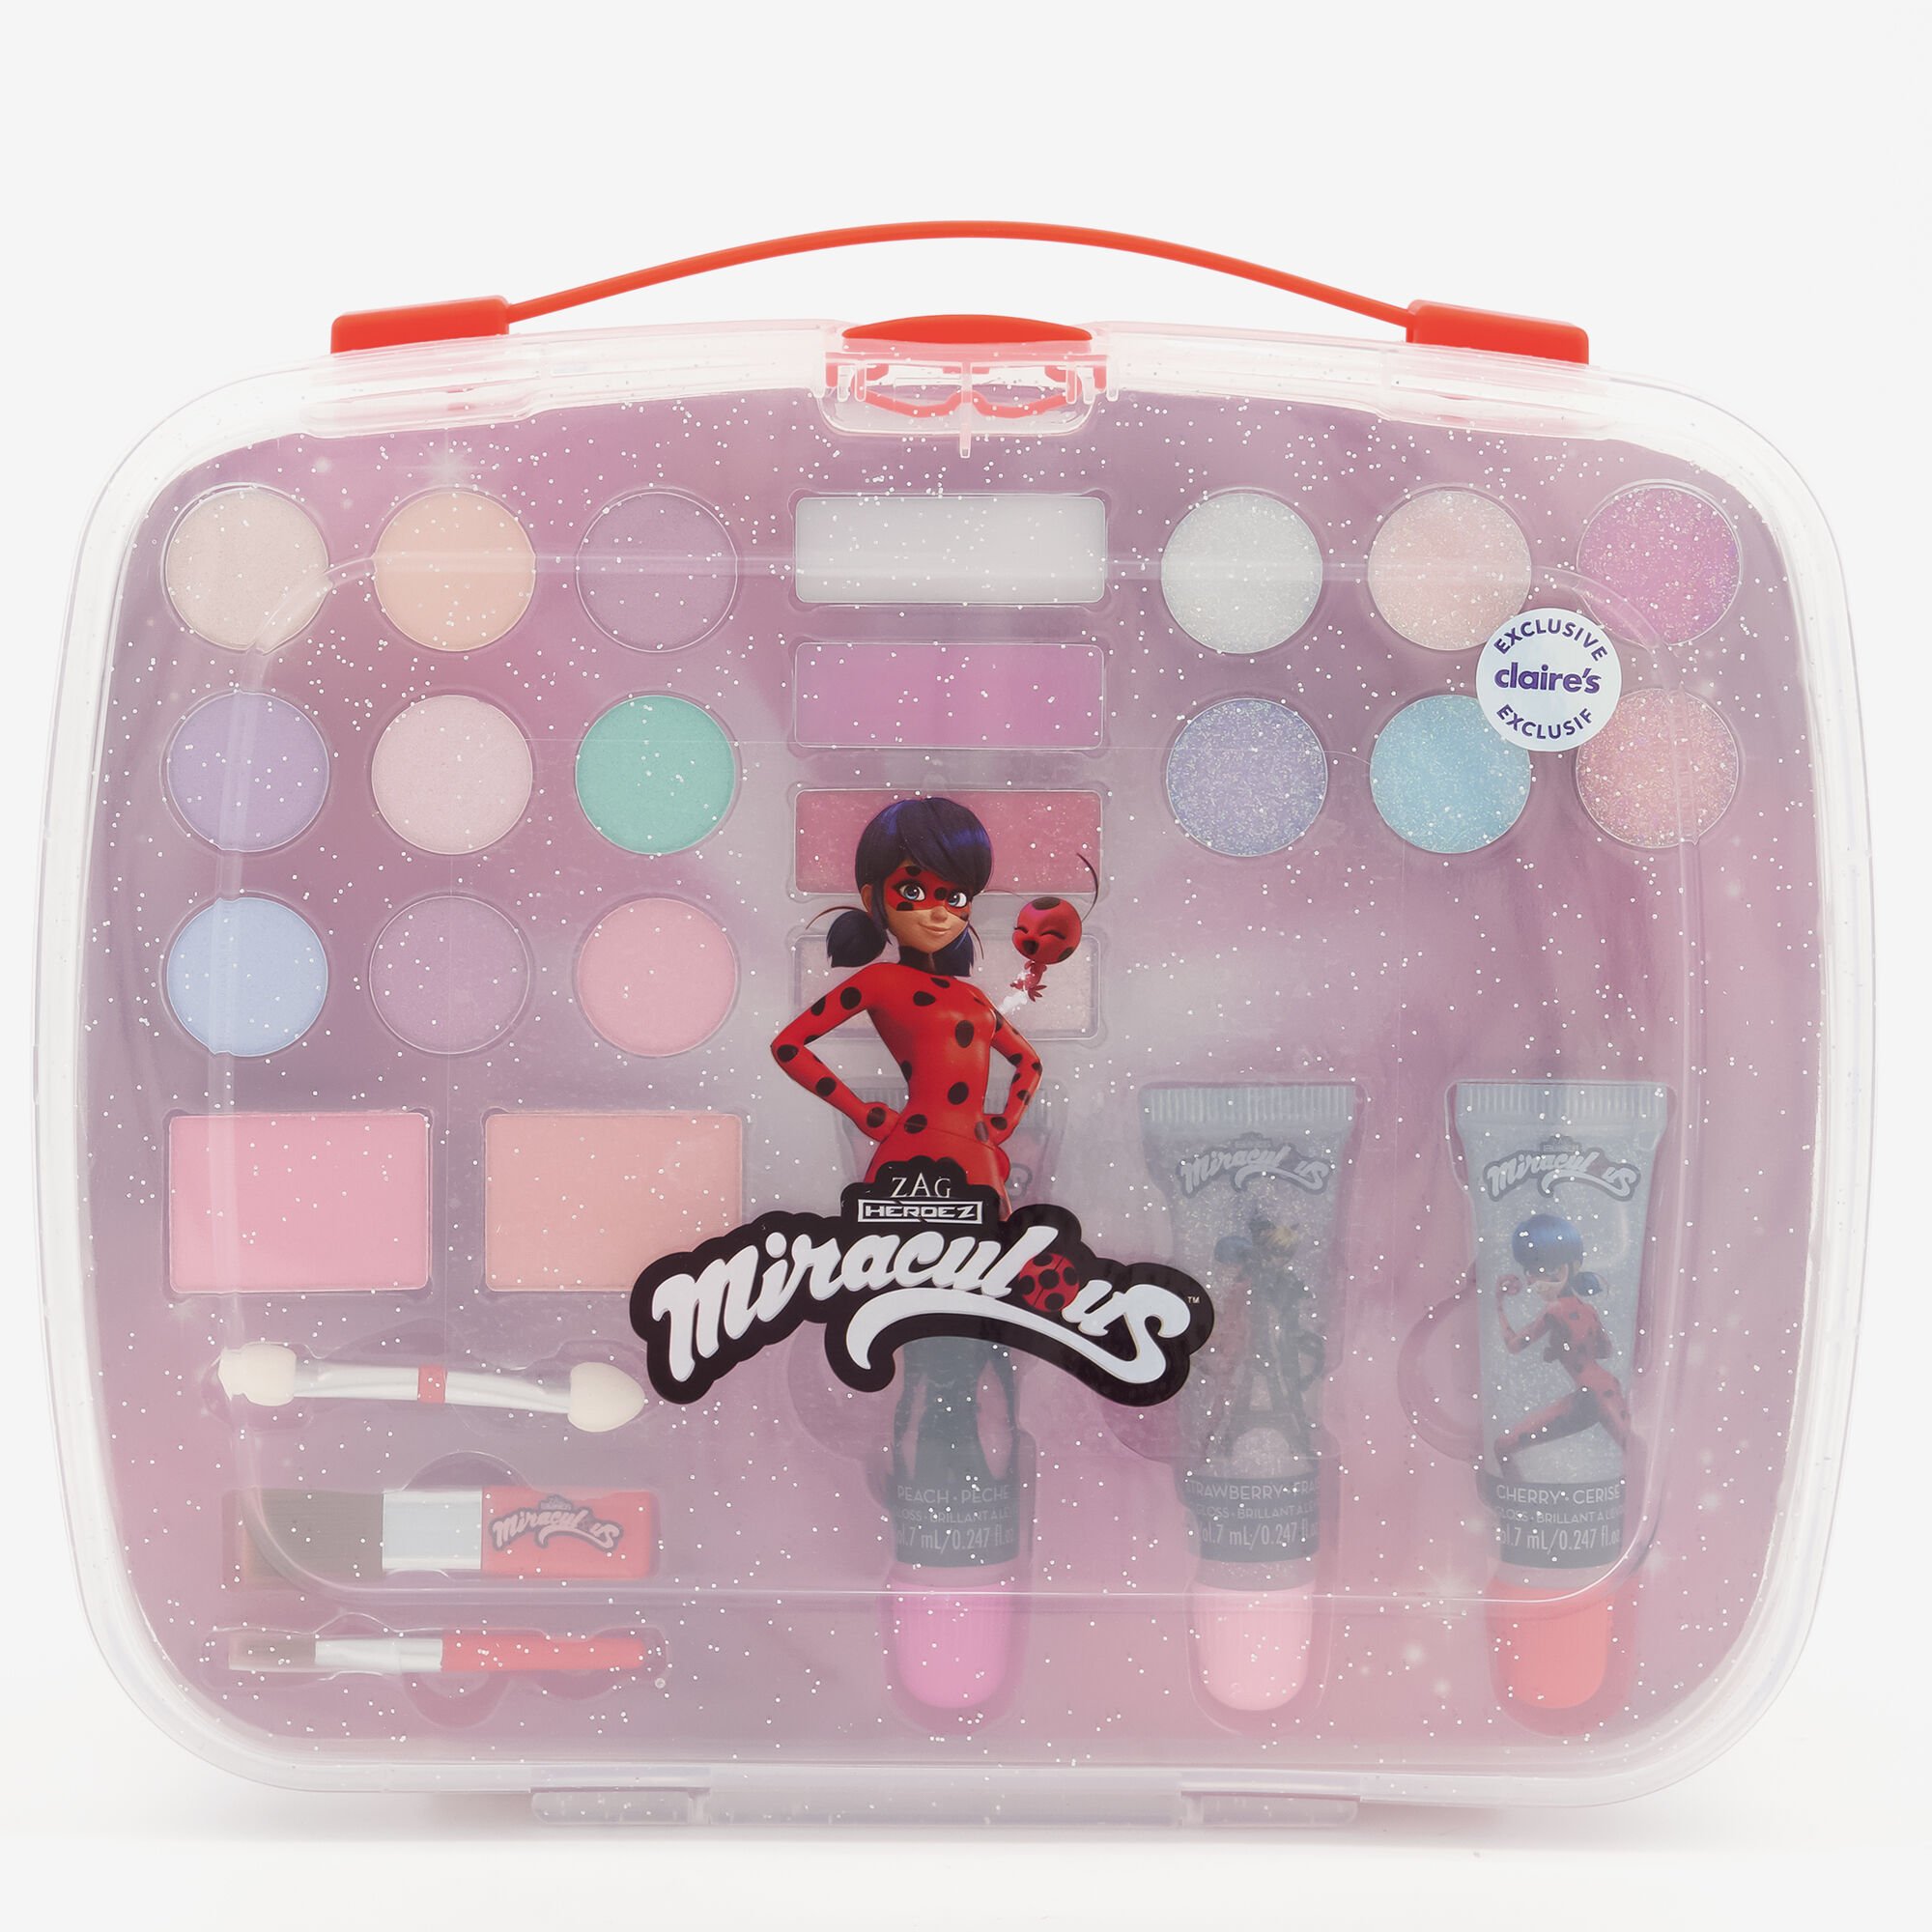 View Claires Miraculous Cosmetic Set Case information